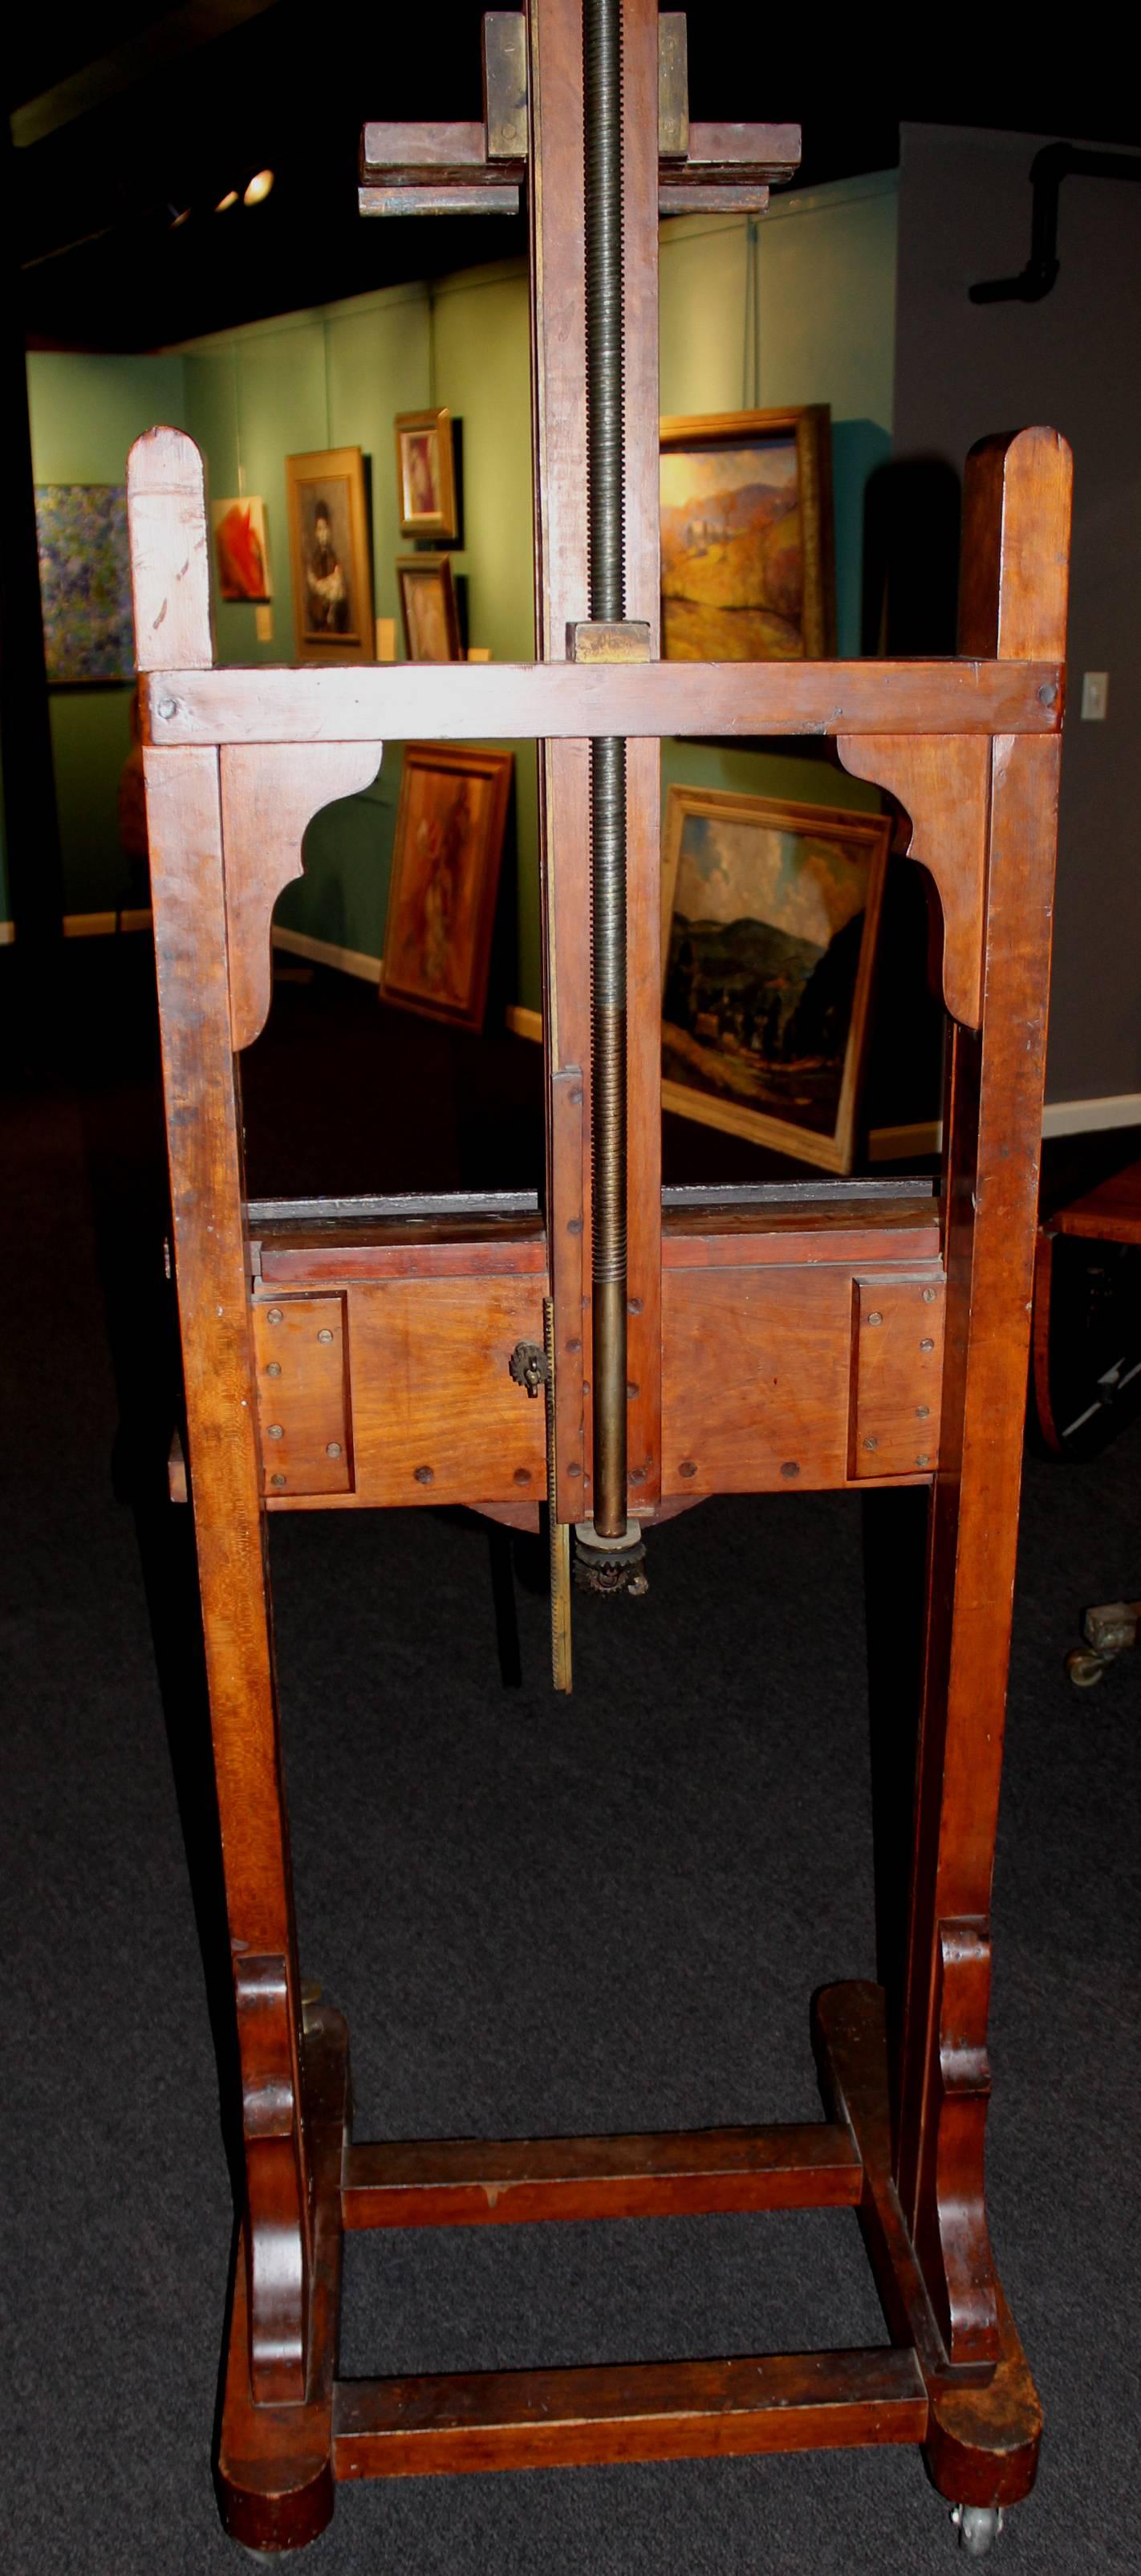 A wooden artist’s easel owned and used by American artist William McGregor Paxton (1869-1941). Paxton was one of the most influential of the Boston School painters and his studio was located at the Fenway Studios in Boston. His finely crafted easel